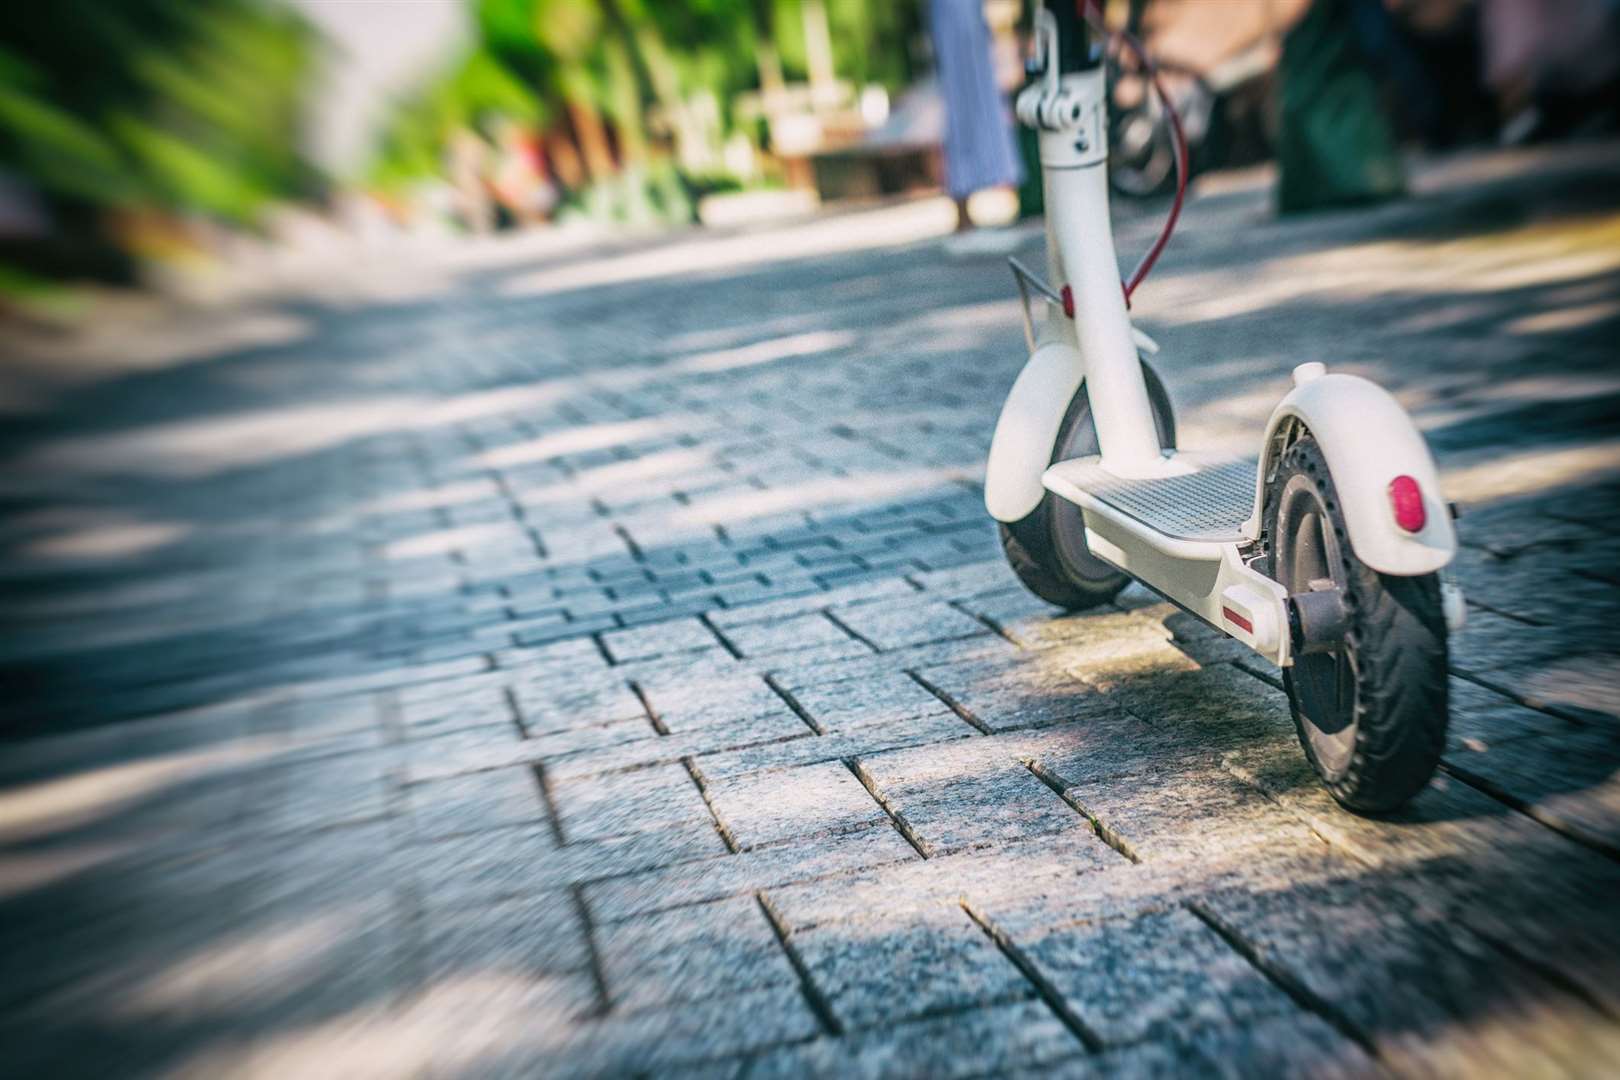 eco friendly transport electro scooter on city sidewalk tile in sunny day. (55242719)